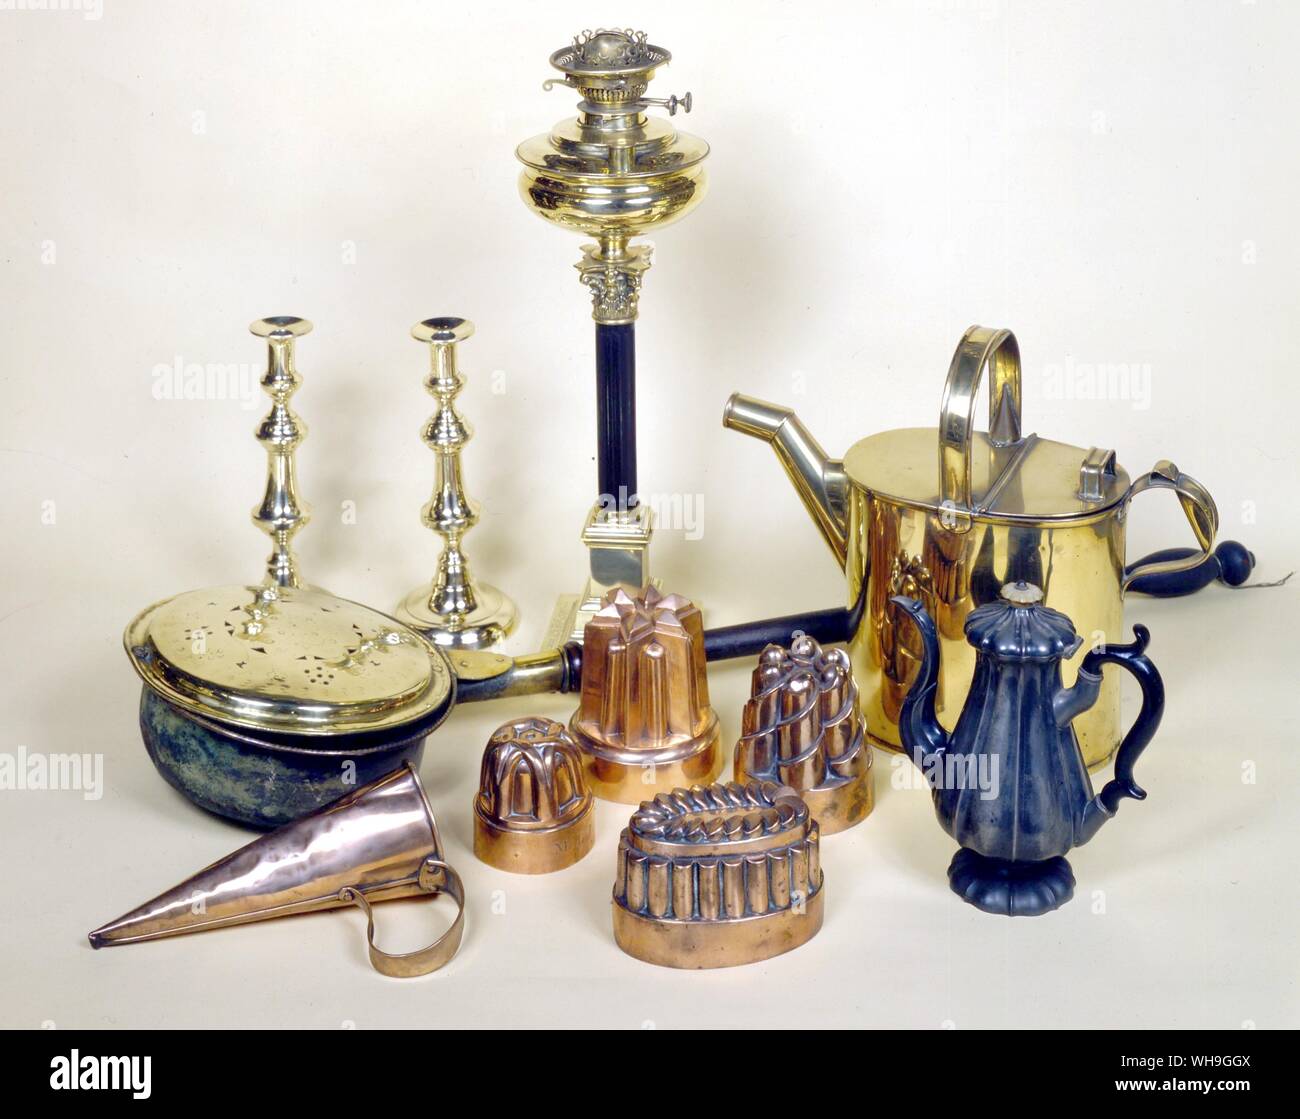 Antiques Display of Various Objects Stock Photo